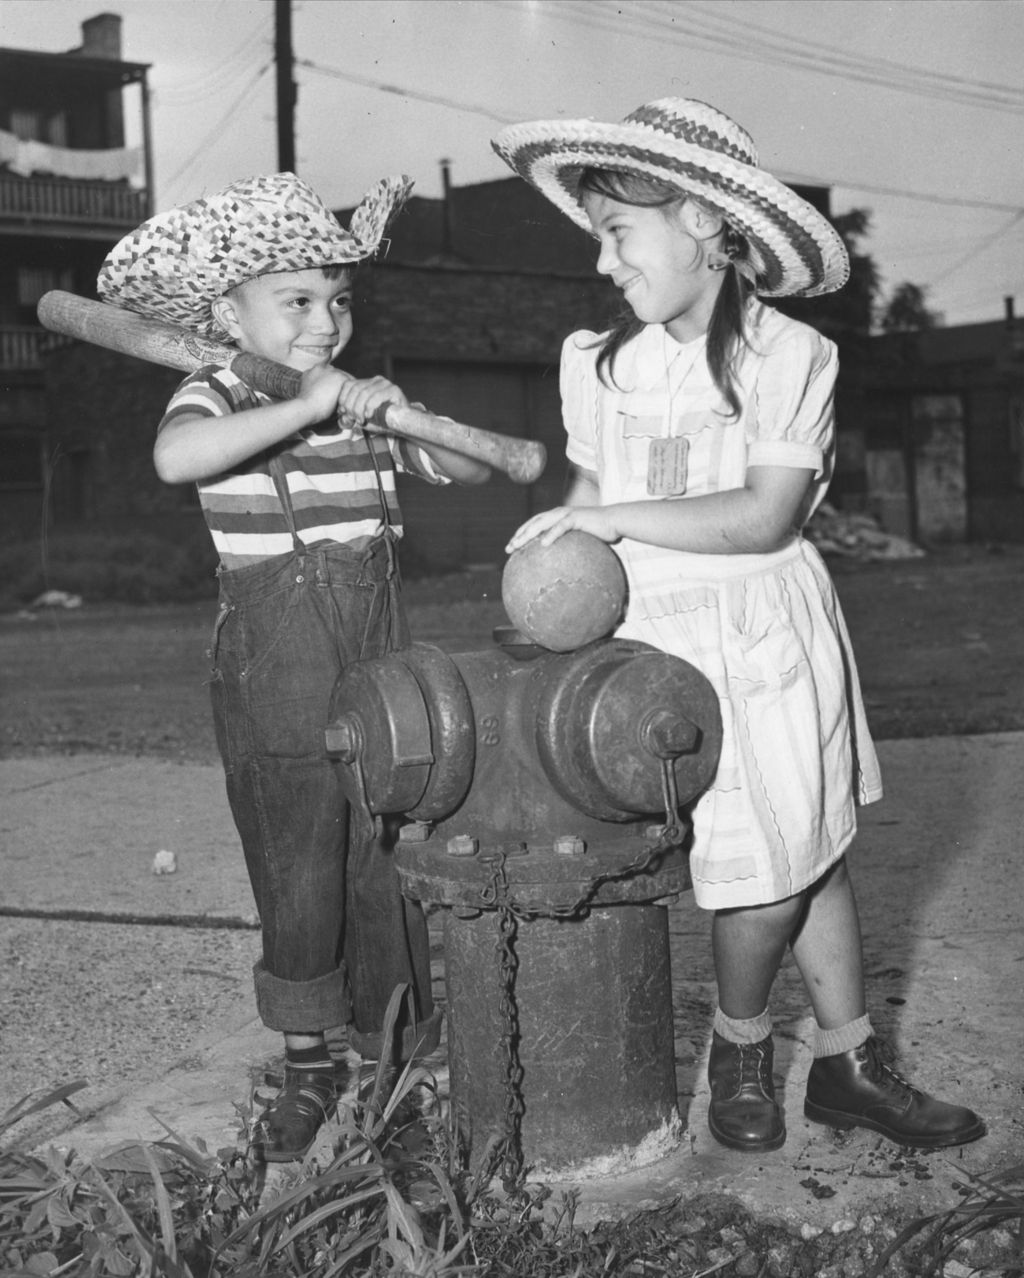 Boy and a girl standing next to a fire hydrant with a bat and softball